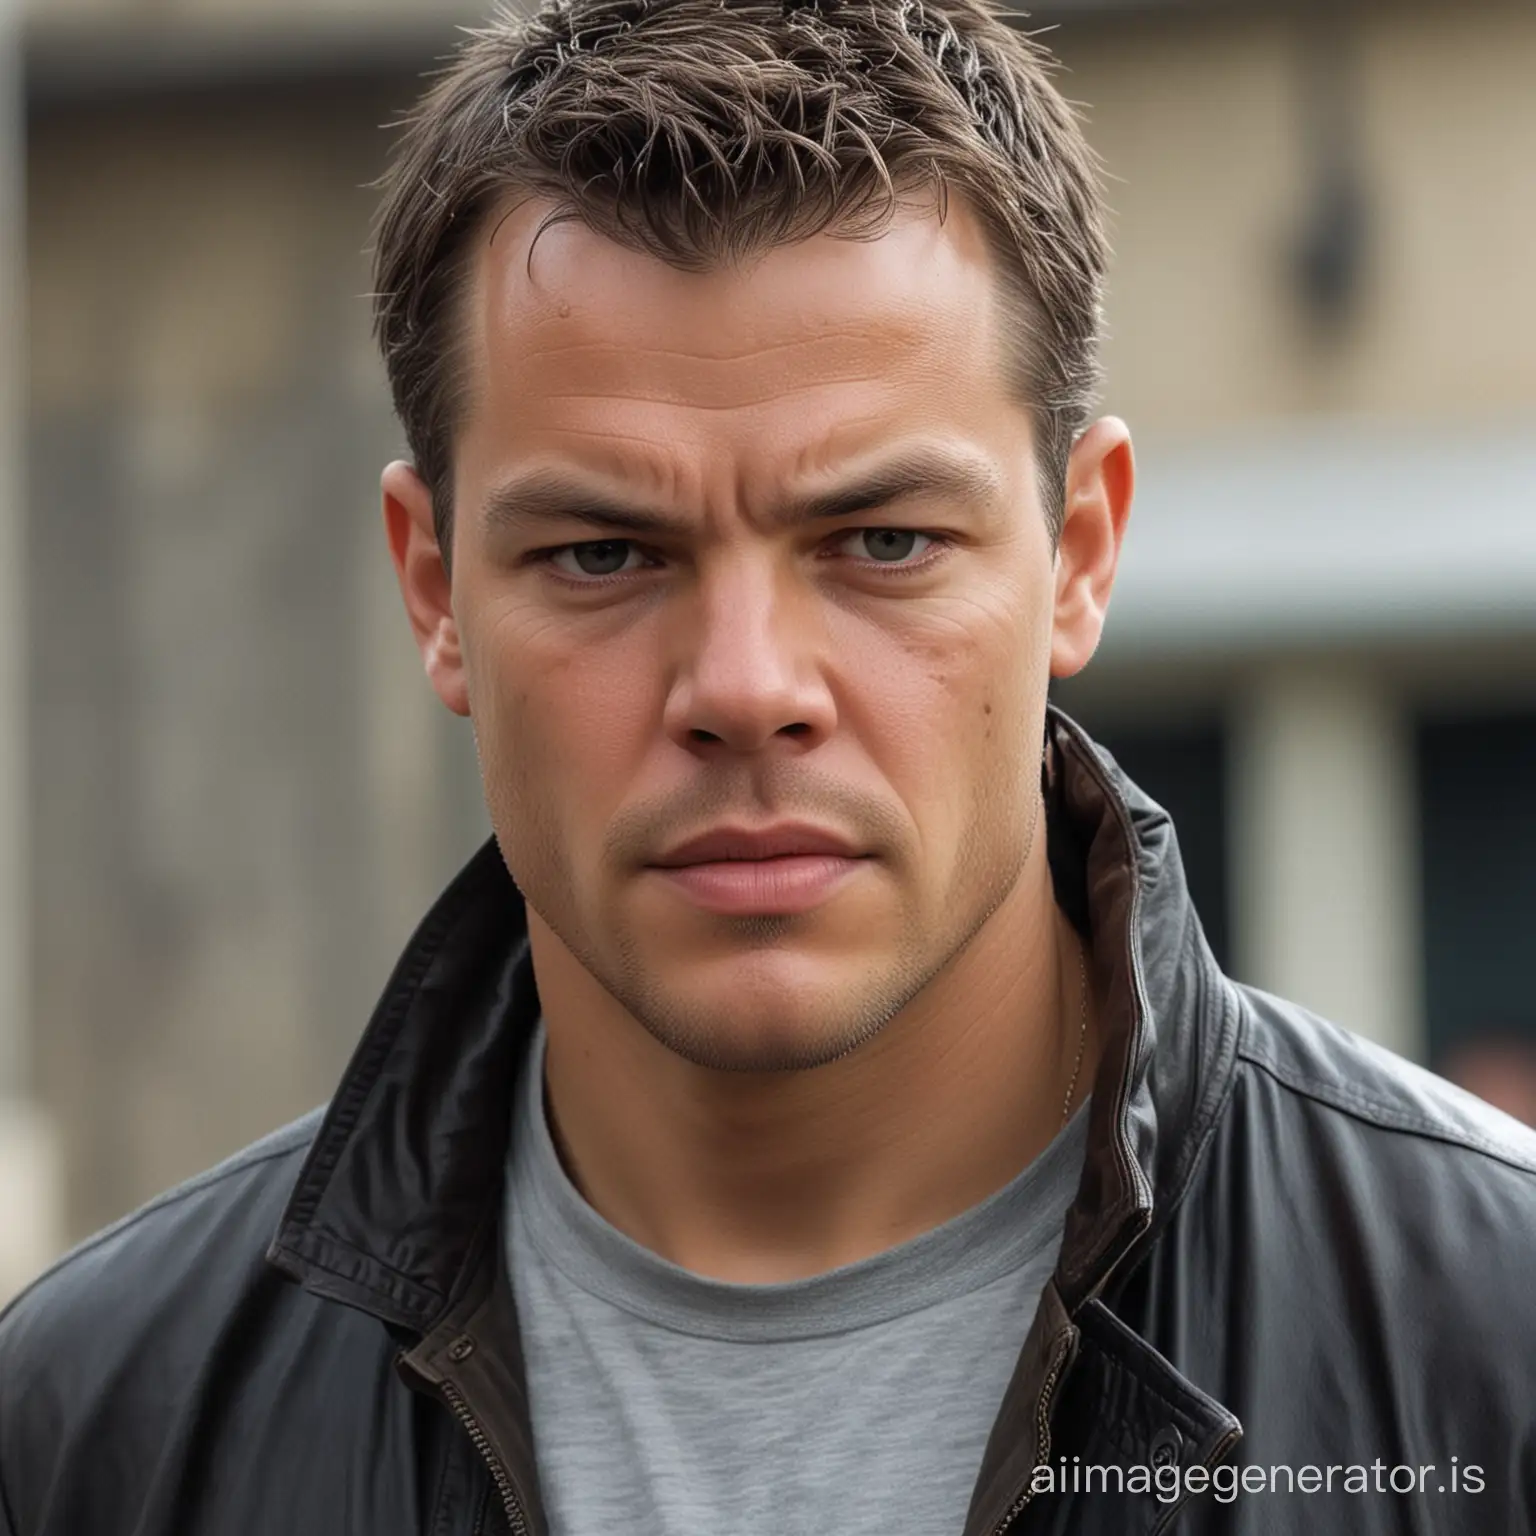 """

In Robert Ludlum's "The Bourne Identity," Jason Bourne is depicted as a man shrouded in mystery, with an appearance that reflects his elusive and enigmatic nature. Physically, Bourne is described as having a compact and athletic build, suggesting both strength and agility. His hair is dark and closely cropped, framing a face characterized by sharp, angular features and intense, piercing eyes that seem to hold a hidden depth of knowledge and experience.

Bourne's attire is functional and unassuming, reflecting his background as a covert operative. He typically dresses in nondescript clothing that allows him to blend seamlessly into his surroundings, favoring practical garments such as dark trousers, a plain shirt, and a weathered leather jacket. Despite his understated appearance, there is an undeniable sense of danger and unpredictability to Bourne, a silent threat lurking beneath the surface.

Throughout "The Bourne Identity," Bourne's appearance undergoes subtle changes as he grapples with fragmented memories and a past that remains elusive. His physicality becomes a key element of his identity, a reflection of the internal conflict raging within him as he seeks to uncover the truth about his own existence. As the story unfolds, Bourne's appearance serves as a visual representation of his journey of self-discovery and redemption, adding depth and complexity to his character.
"""